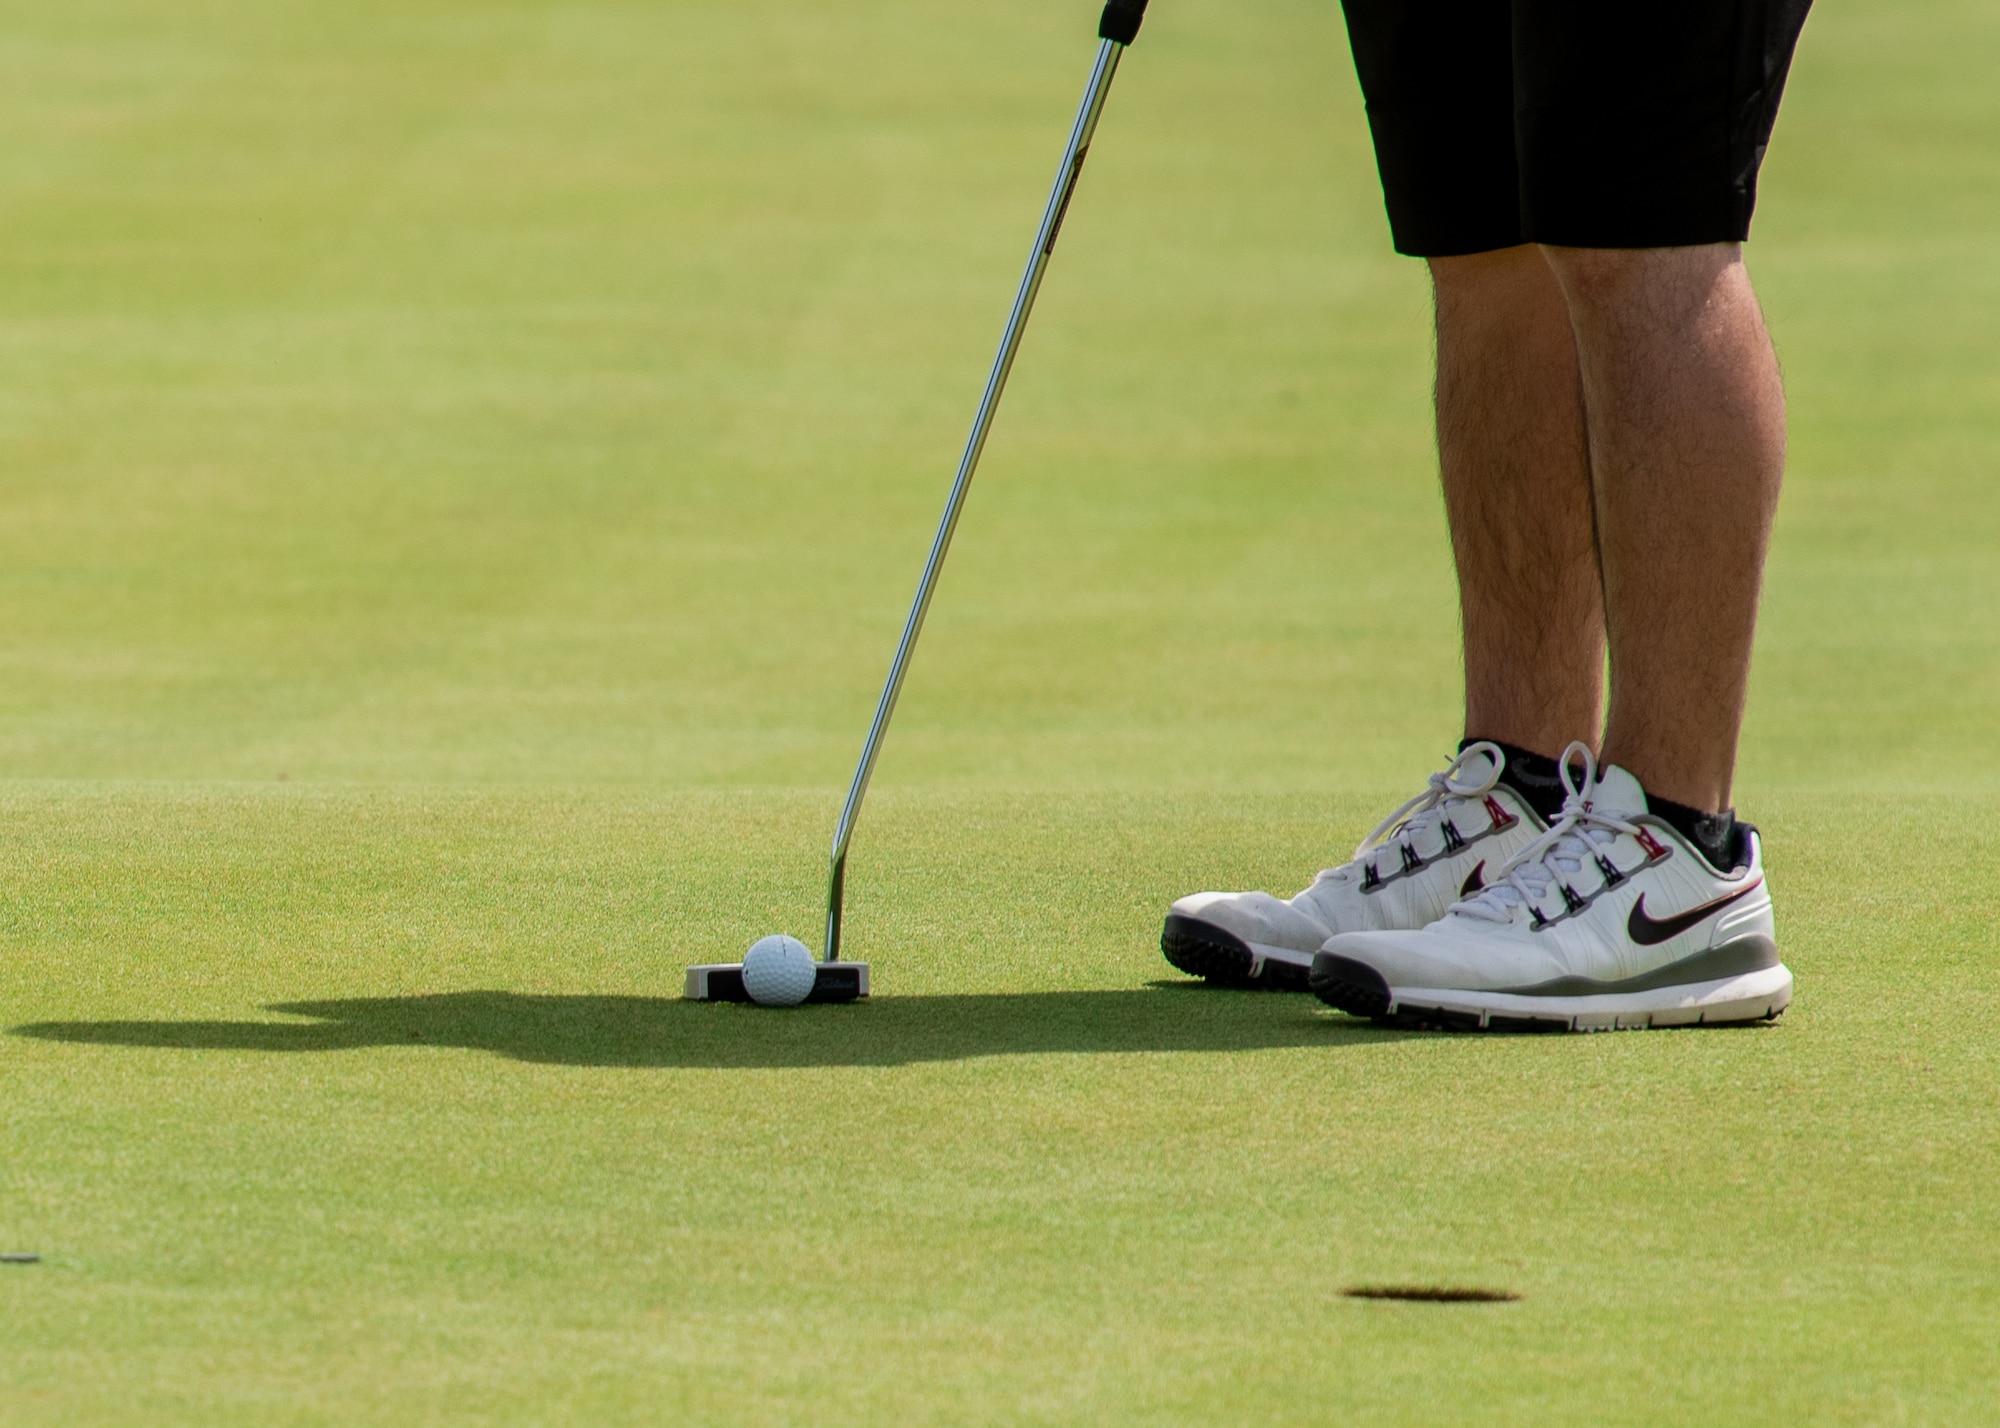 An Armed Forces Golf Championship participant prepares to putt, May 16, 2019, at Falcon Dunes Golf Course near Luke Air Force Base, Ariz.